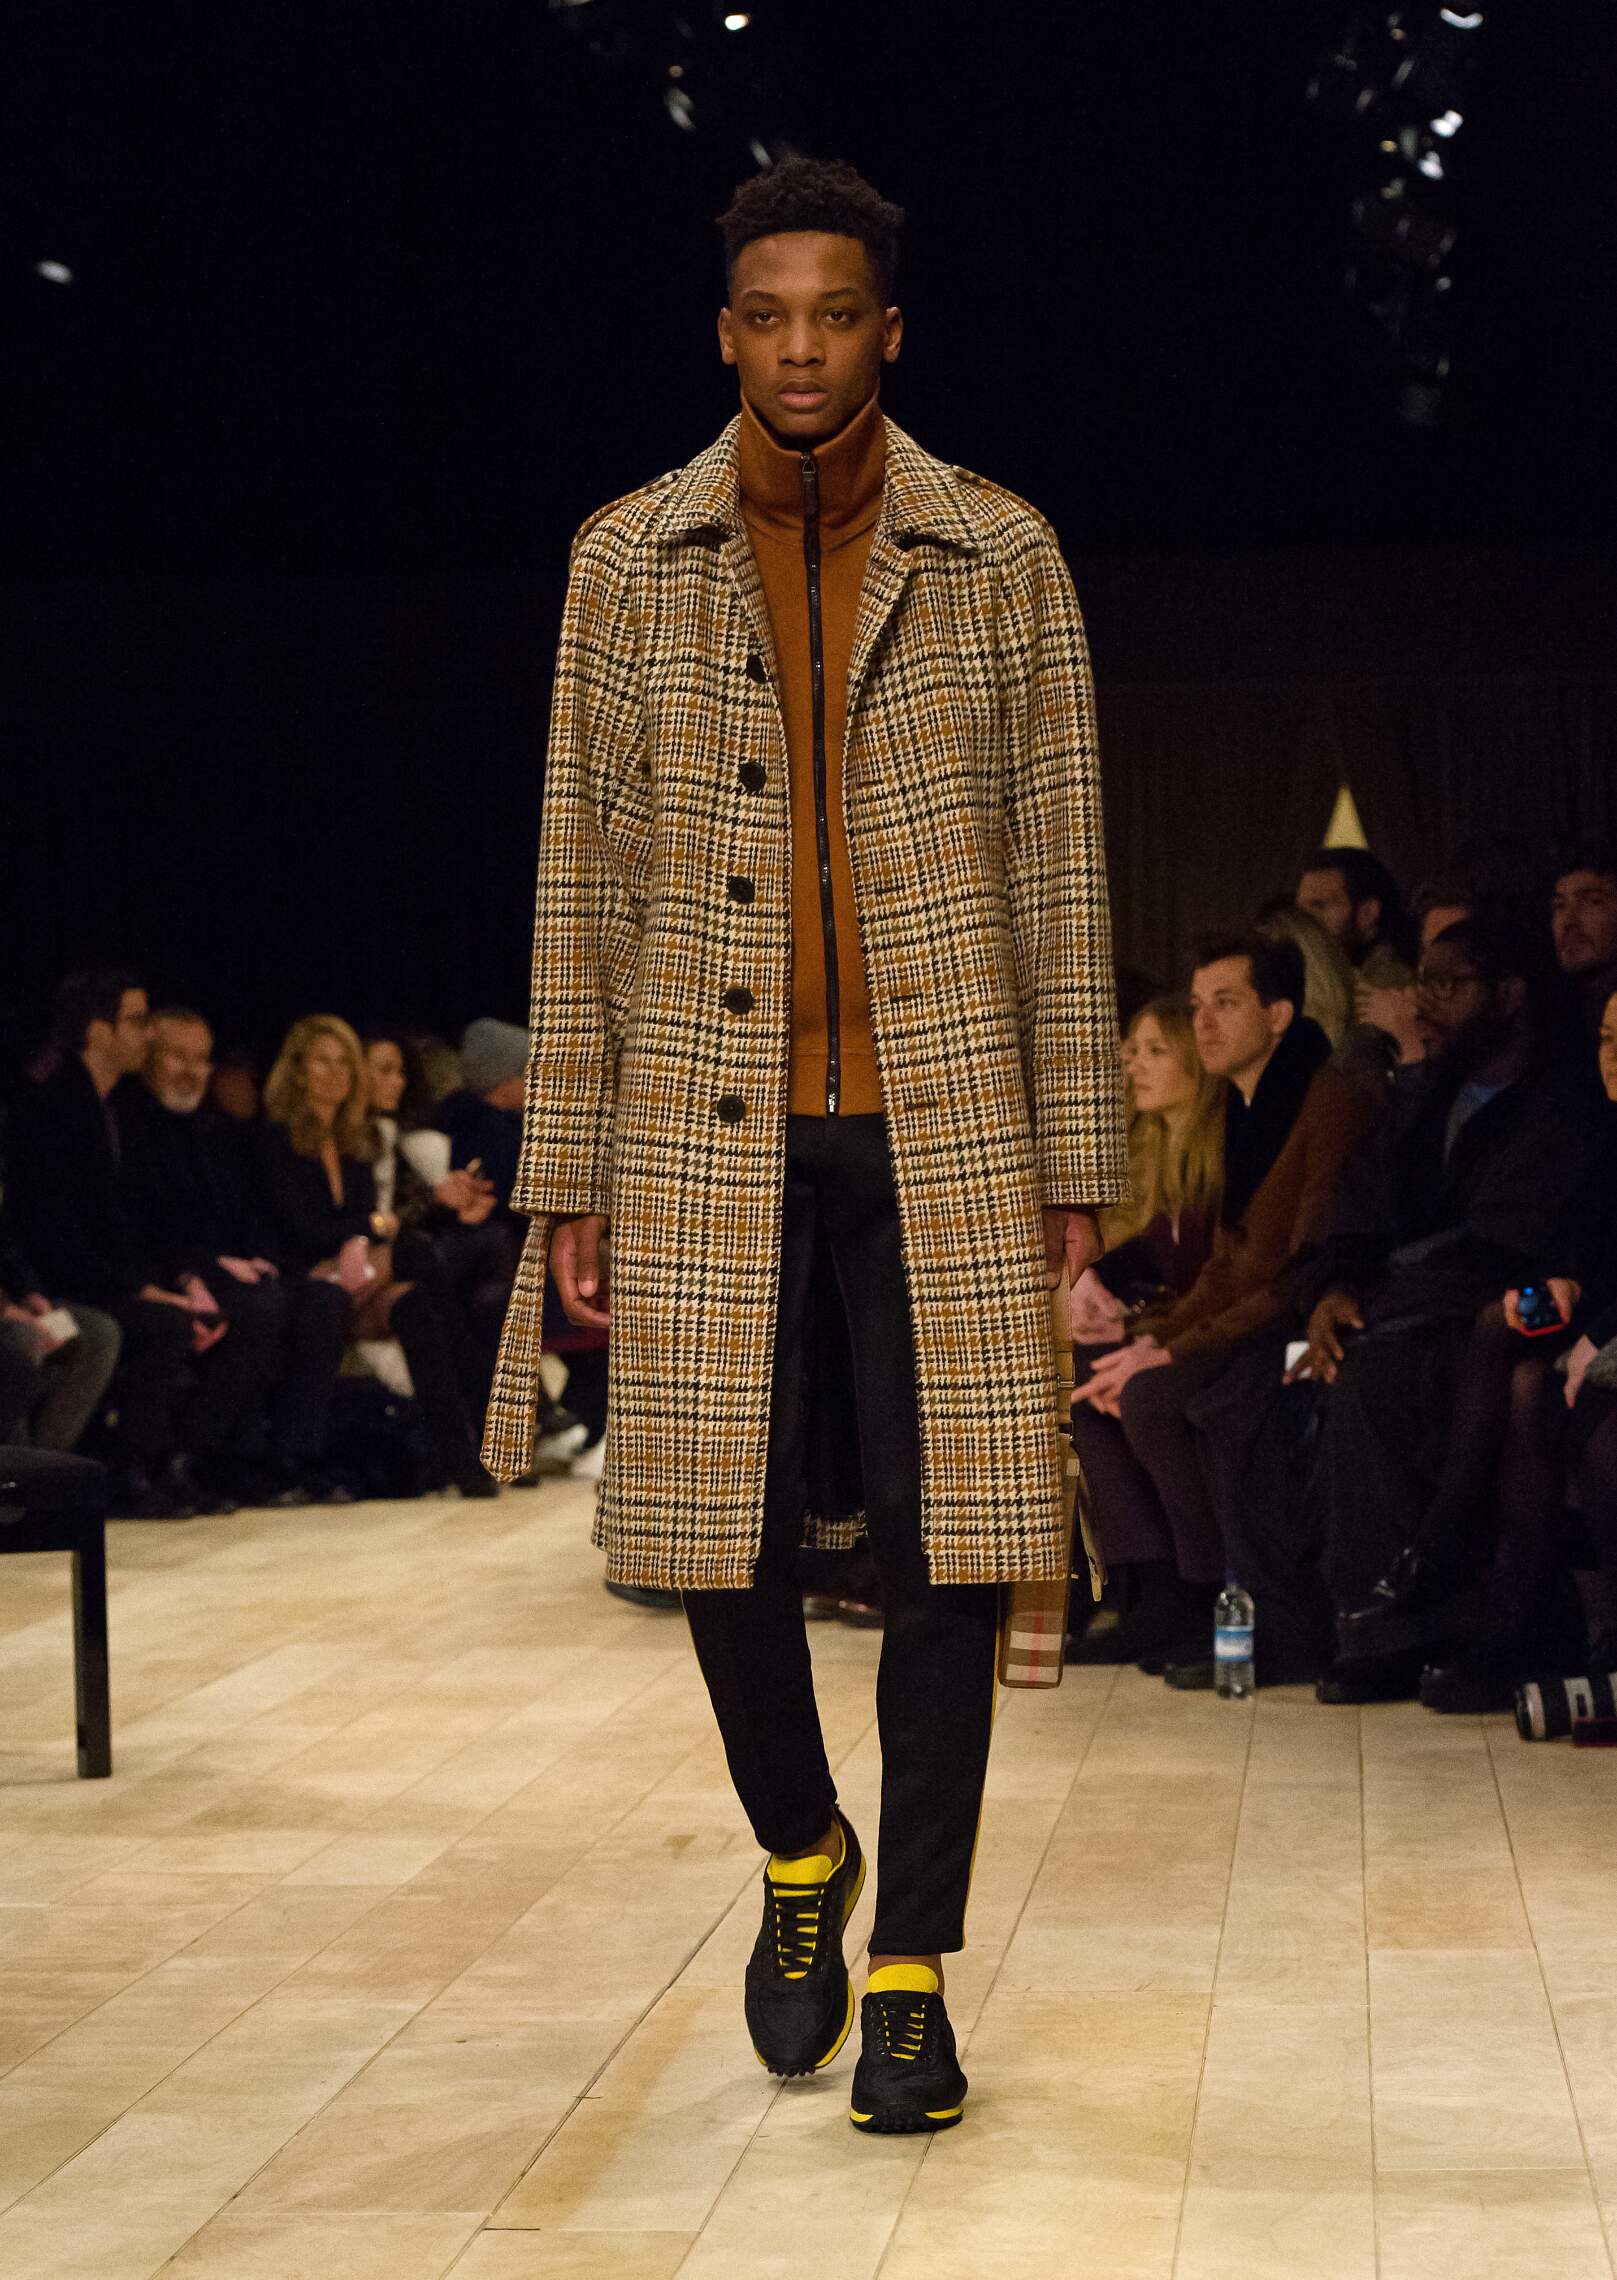 BURBERRY FALL WINTER 2016-17 MEN’S COLLECTION | The Skinny Beep